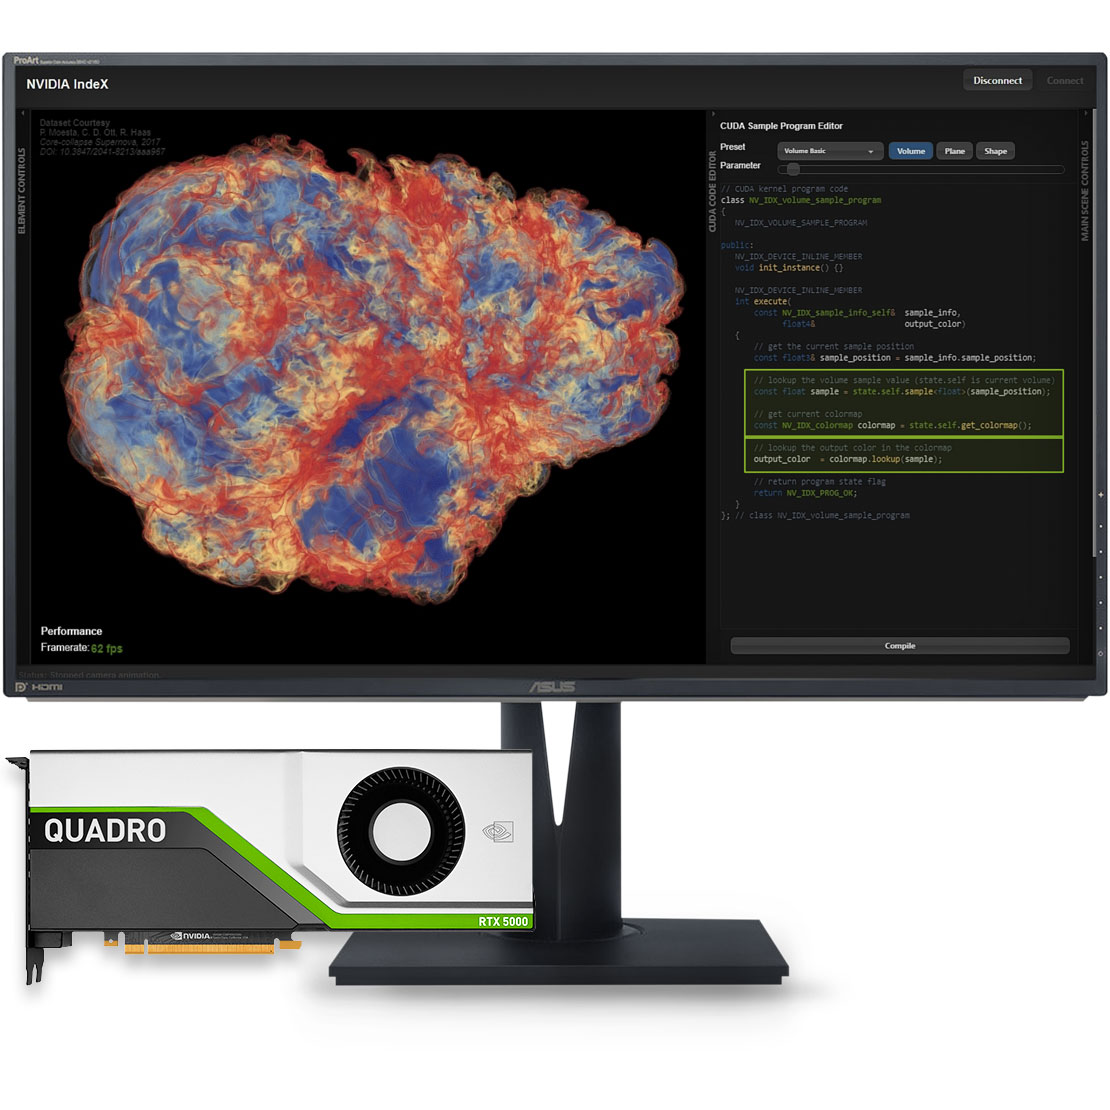 Data Science Software with NVIDIA GPUs